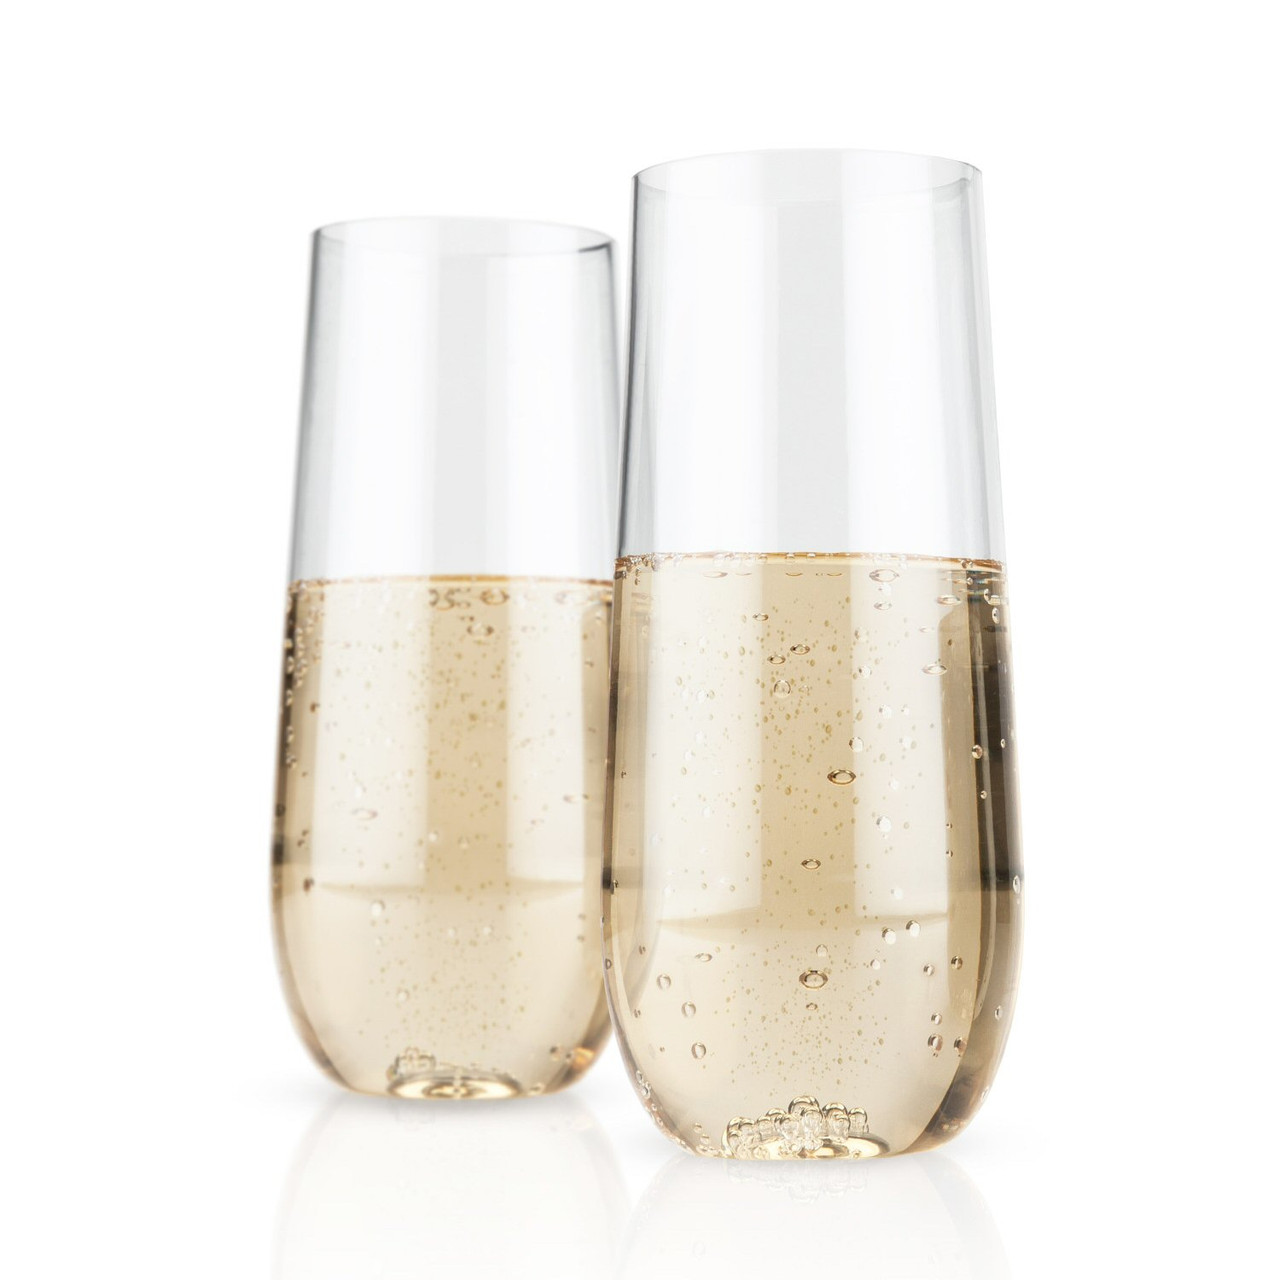 https://cdn11.bigcommerce.com/s-oo0gdojvjo/images/stencil/1280x1280/products/68542/101627/flexi-stemless-champagne-flutes-by-true-set-of-2-3__22361.1683797265.jpg?c=2&imbypass=on